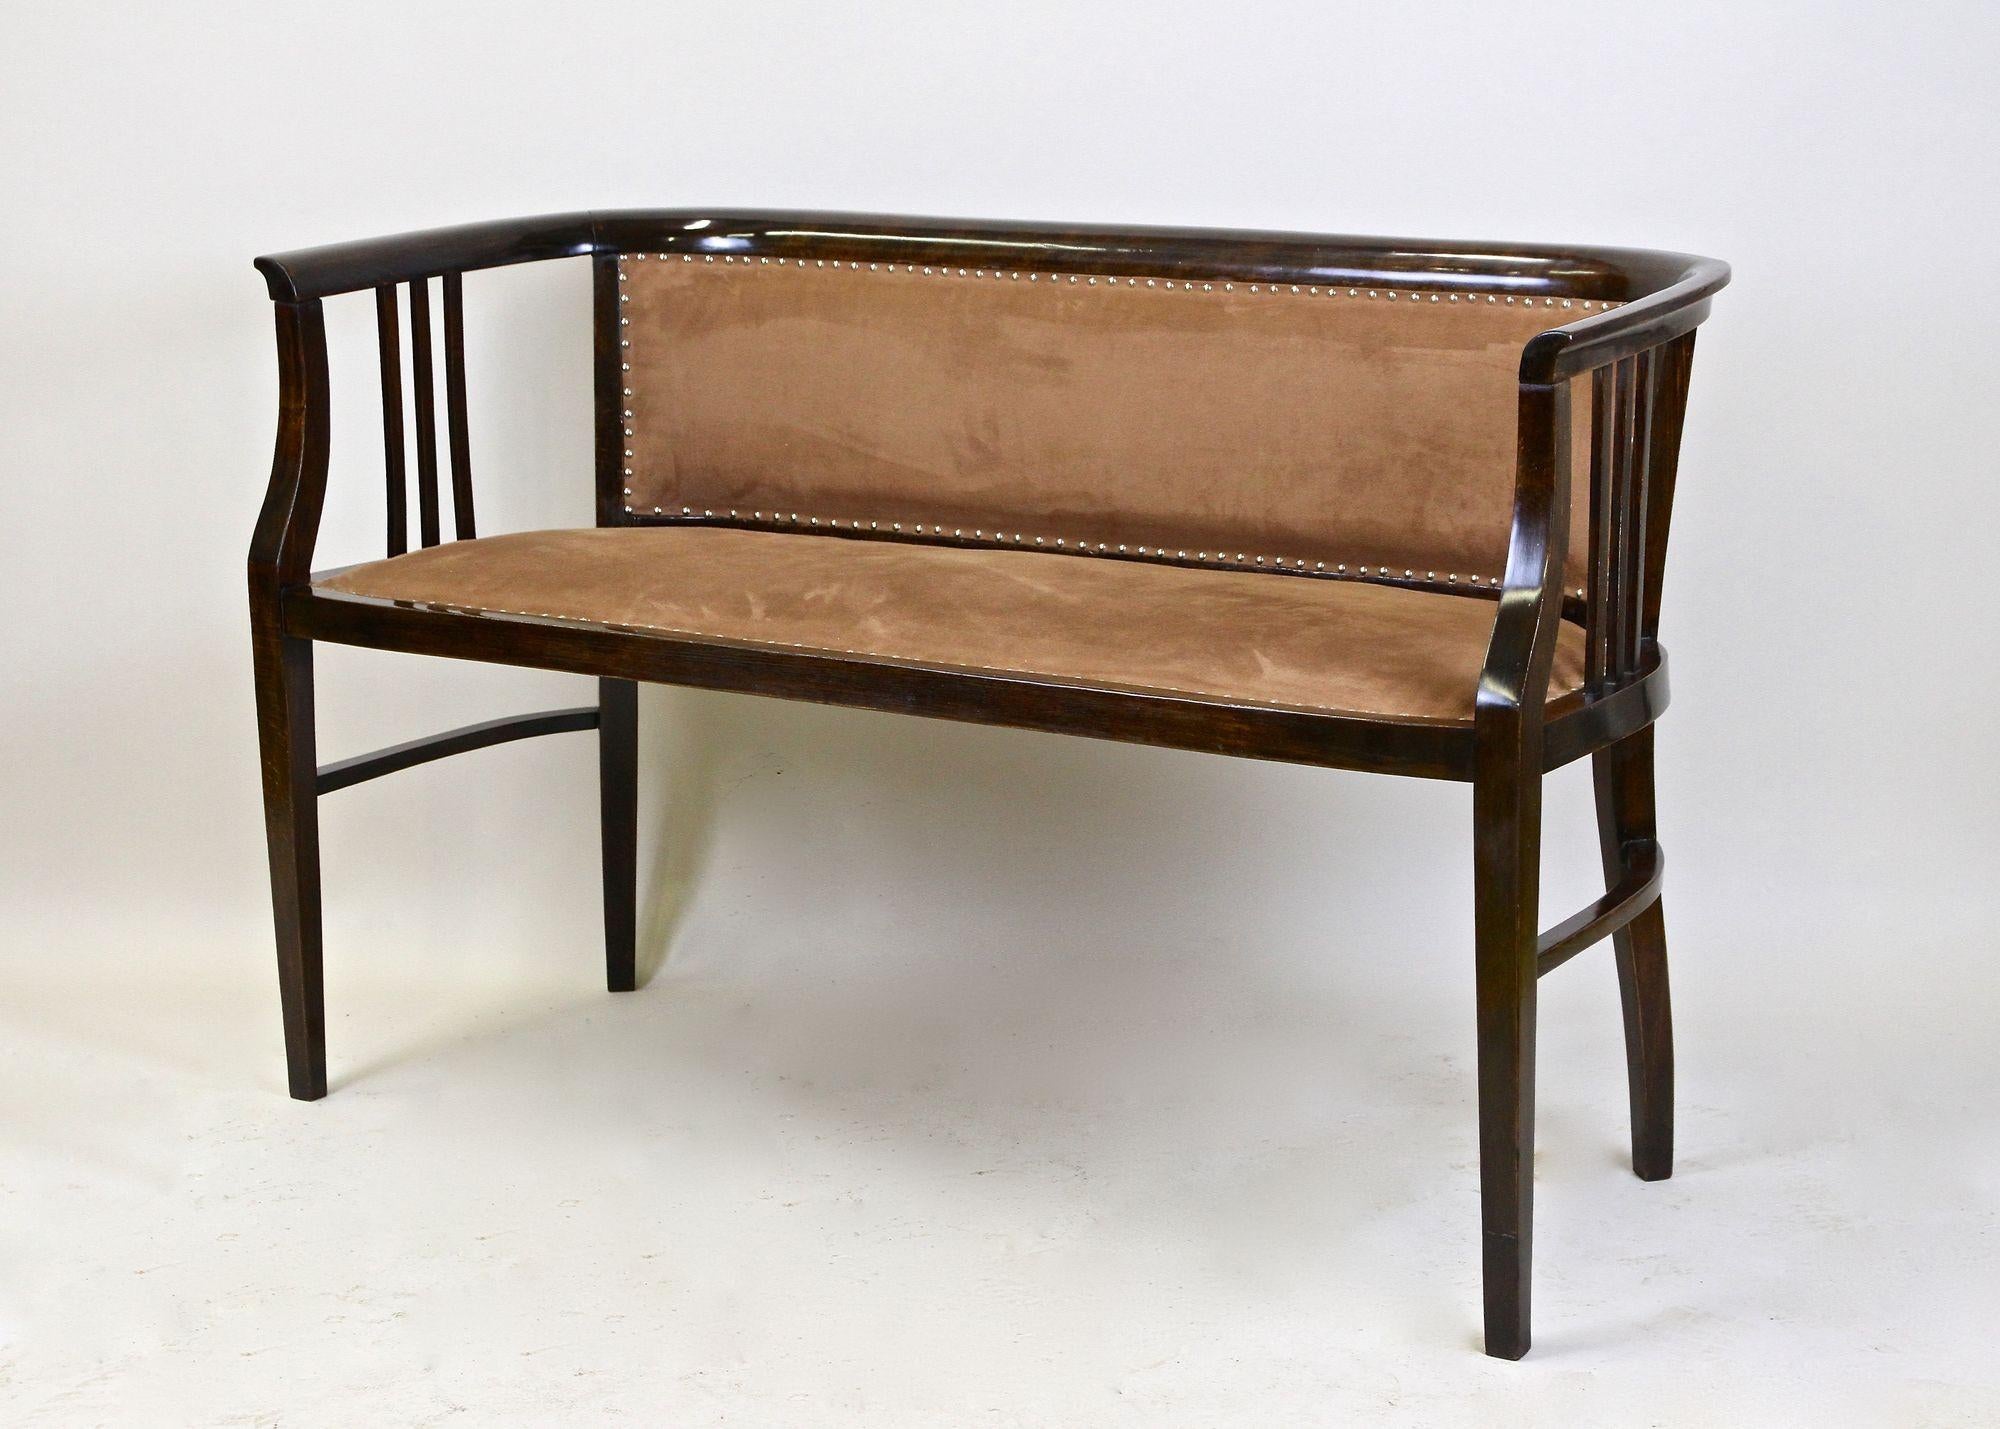 20th Century Art Nouveau Bentwood Bench, Newly Upholstered, Austria, circa 1910 For Sale 7